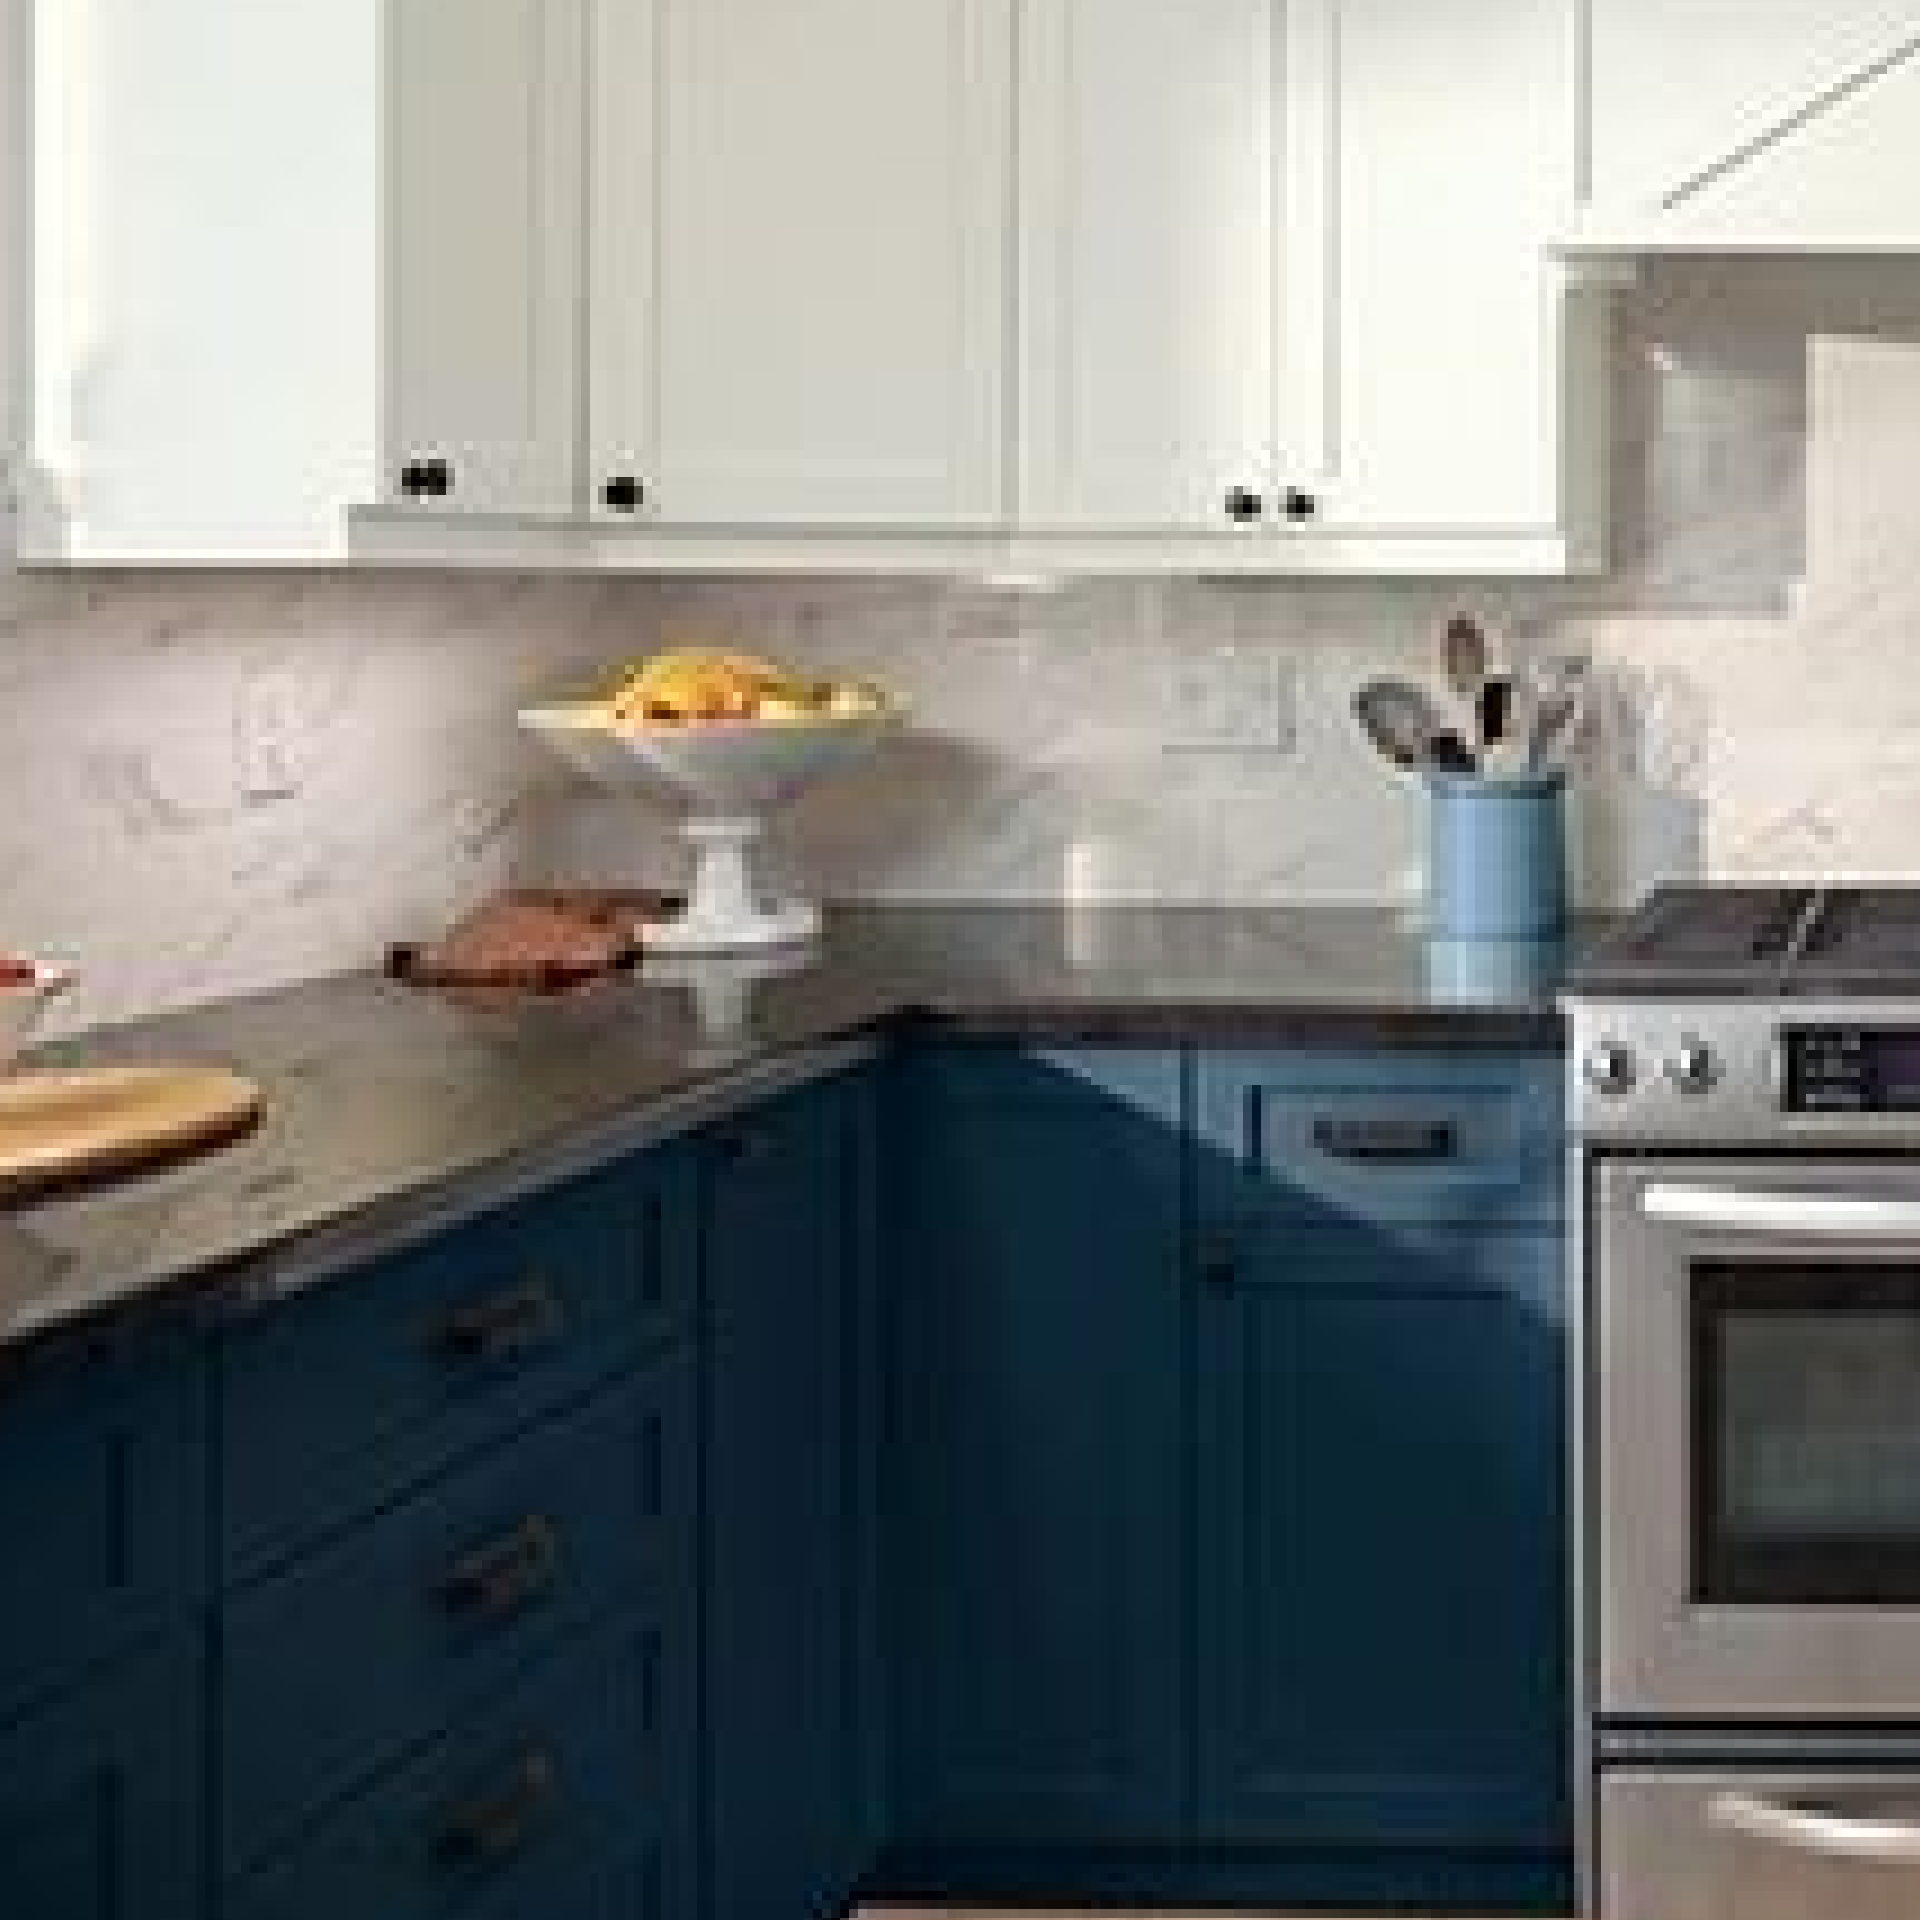 White cabinets, marble backsplash, stainless steel oven and fruit bowl. Cabinets are painted Deep Sky Blue.